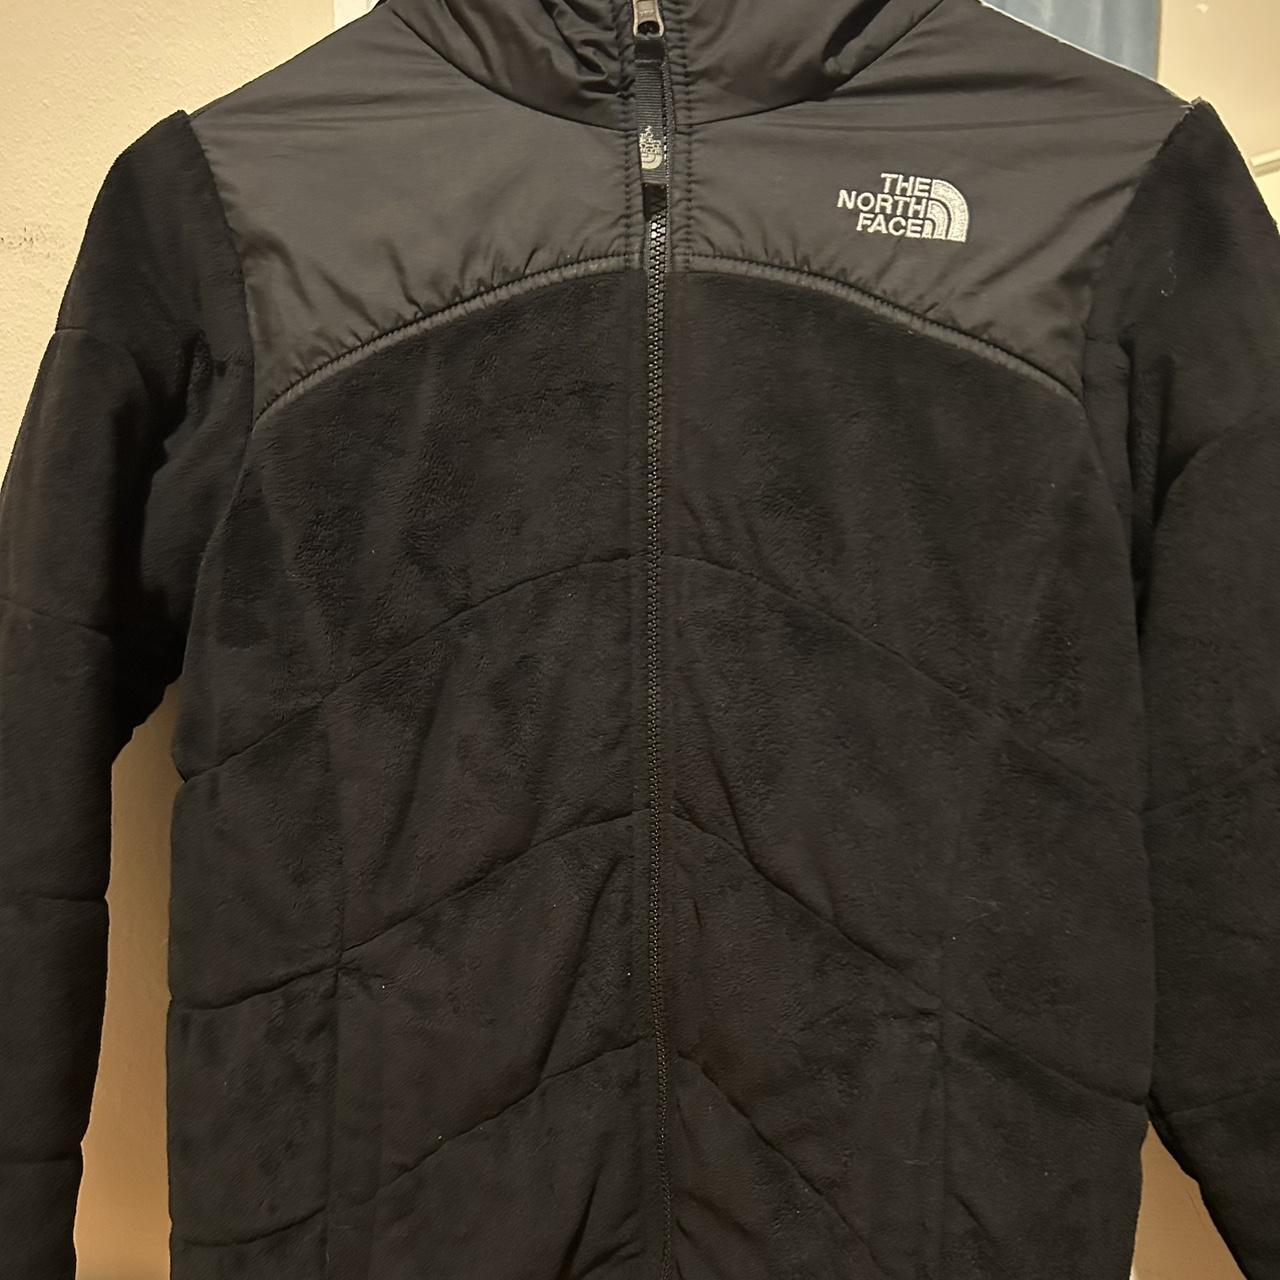 The North Face Women's Black and White Jacket